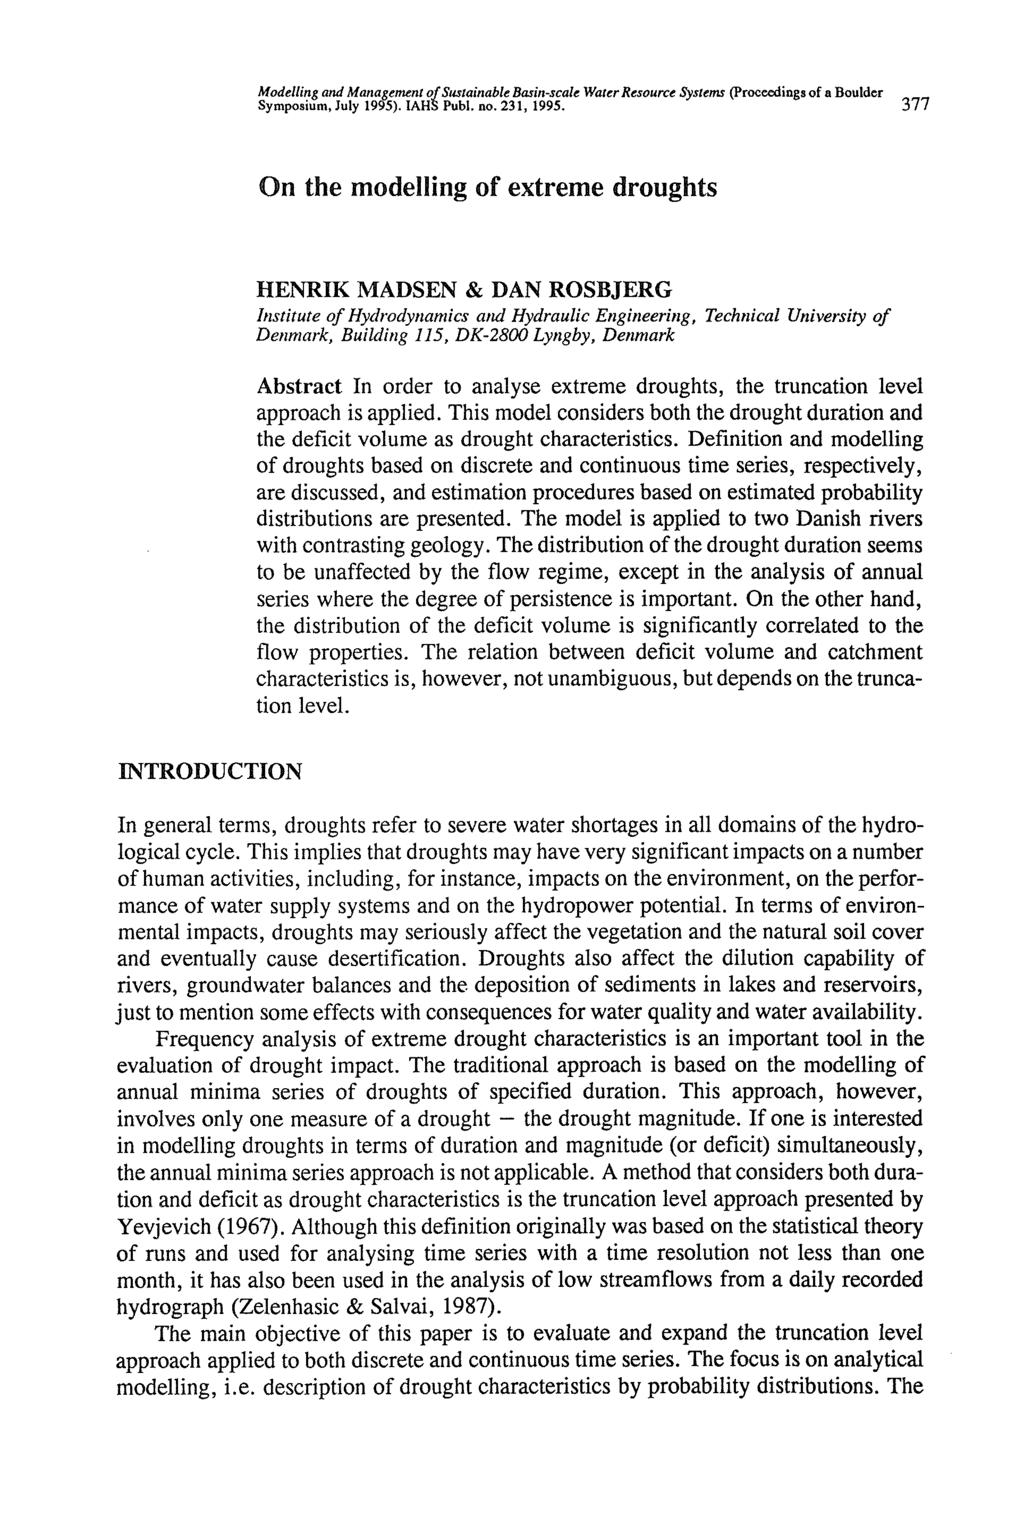 Modelling and Management of Sustainable Basin-scale Water Resource Systems (Proceedings of a Boulder Symposium, July 1995). IAHS Publ. no. 231, 1995.